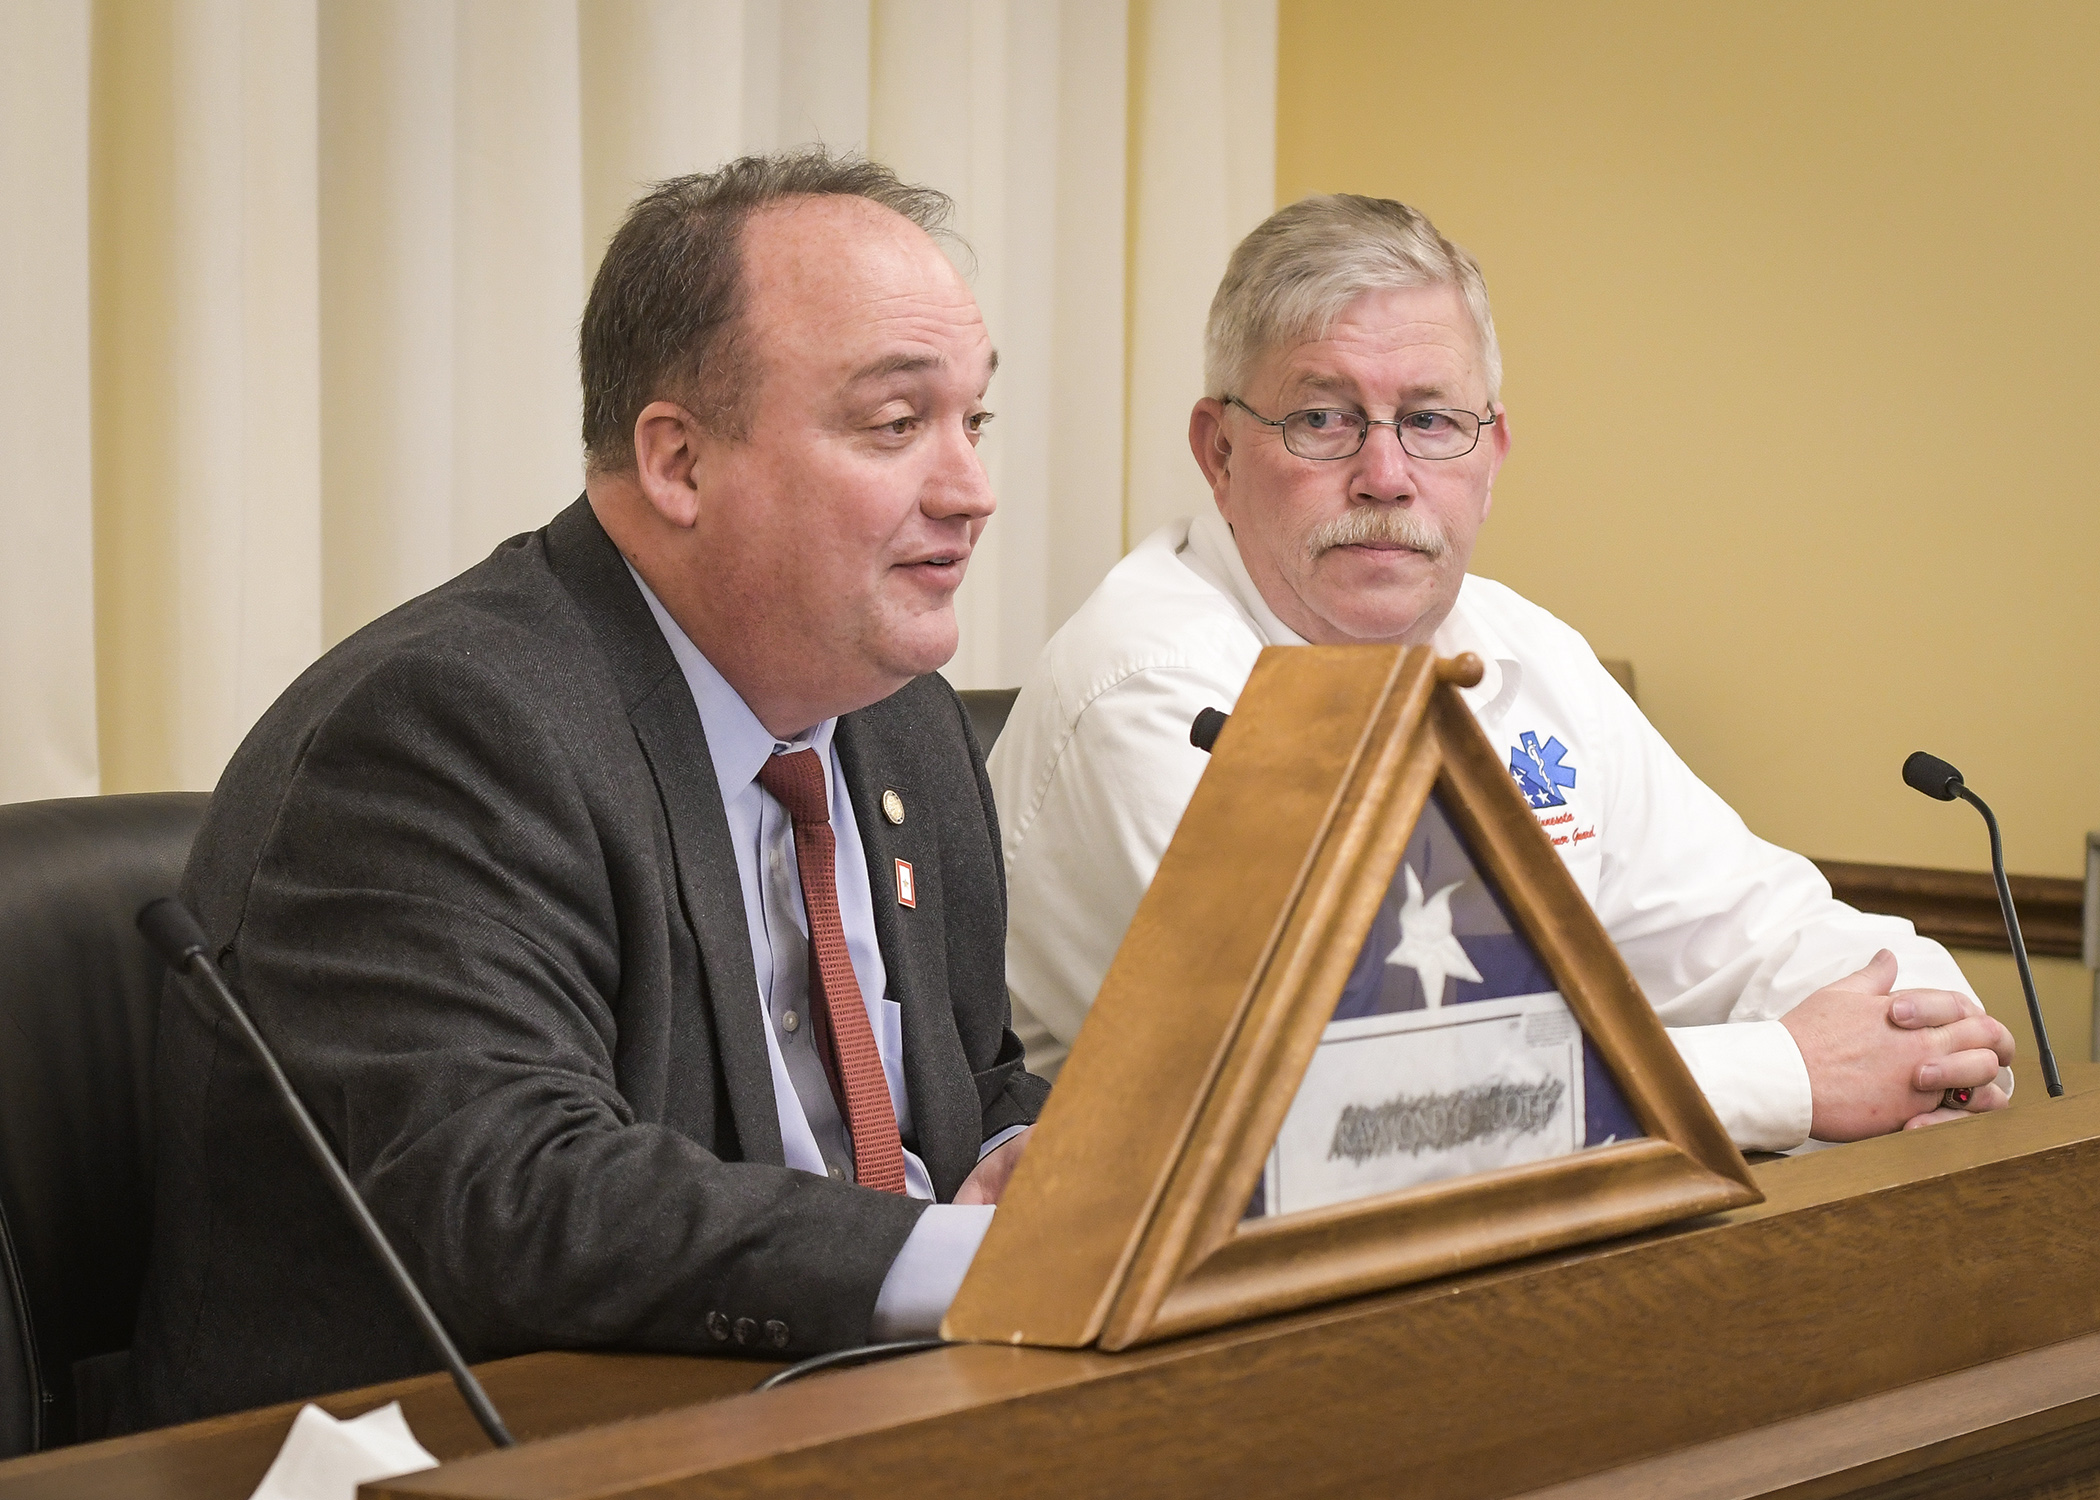 Rep. John Huot, left, and Brad Johnson, executive officer for Minnesota EMS Honor Guard, testify before the House Veterans and Military Affairs Finance and Policy Division March 19. Photo by Andrew VonBank